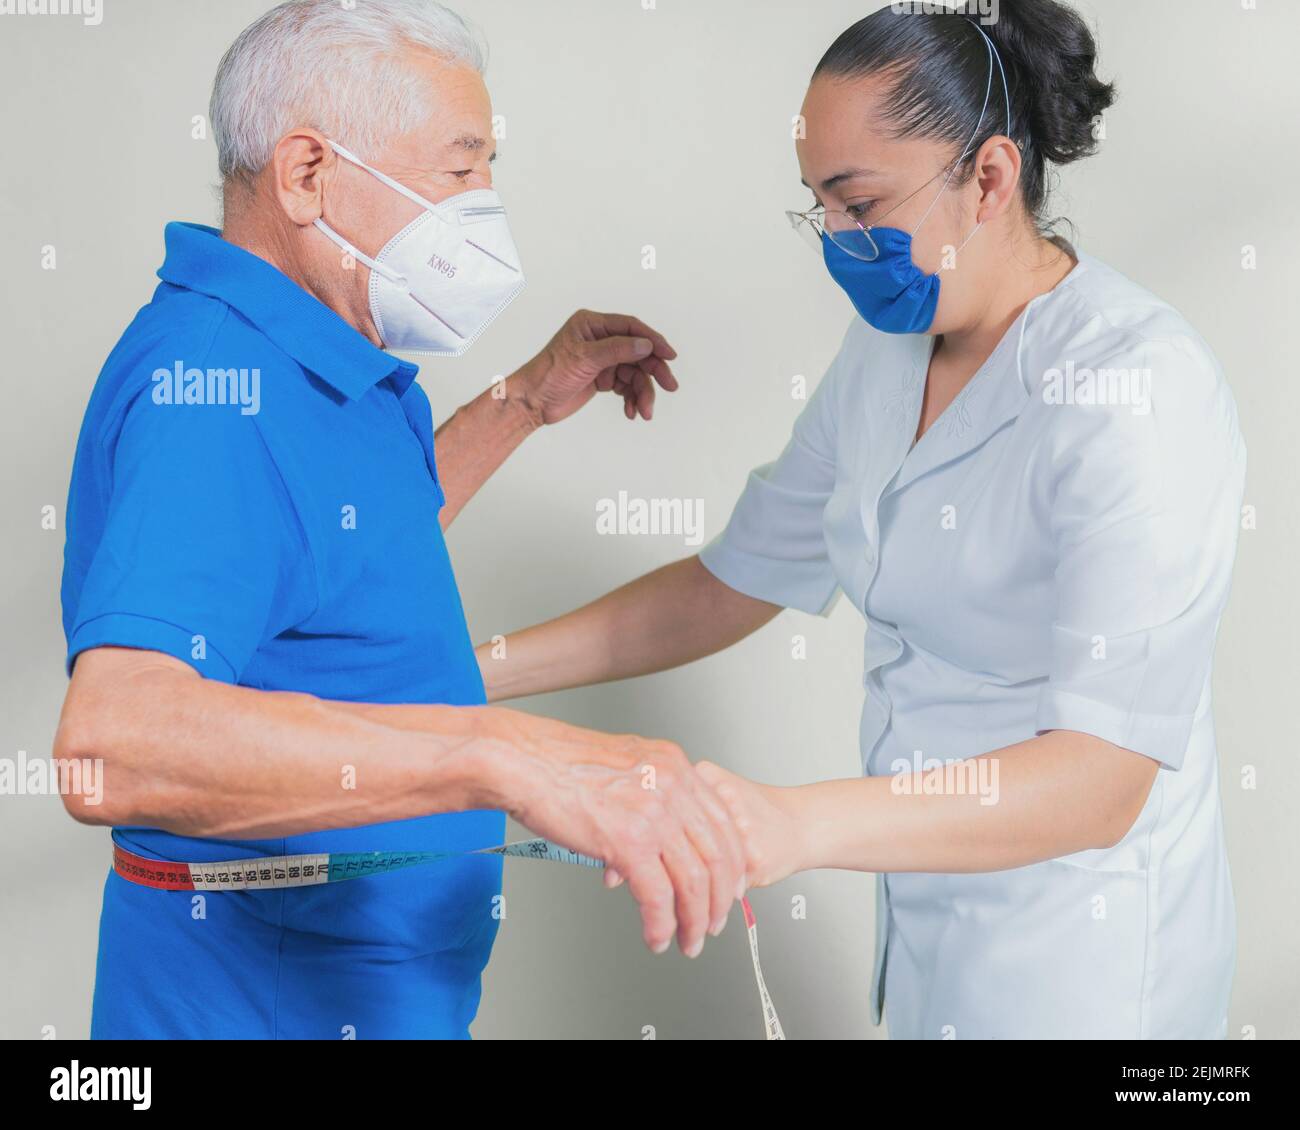 View of a nurse passing the tape measure on the height of an older man to measure his obesity Stock Photo